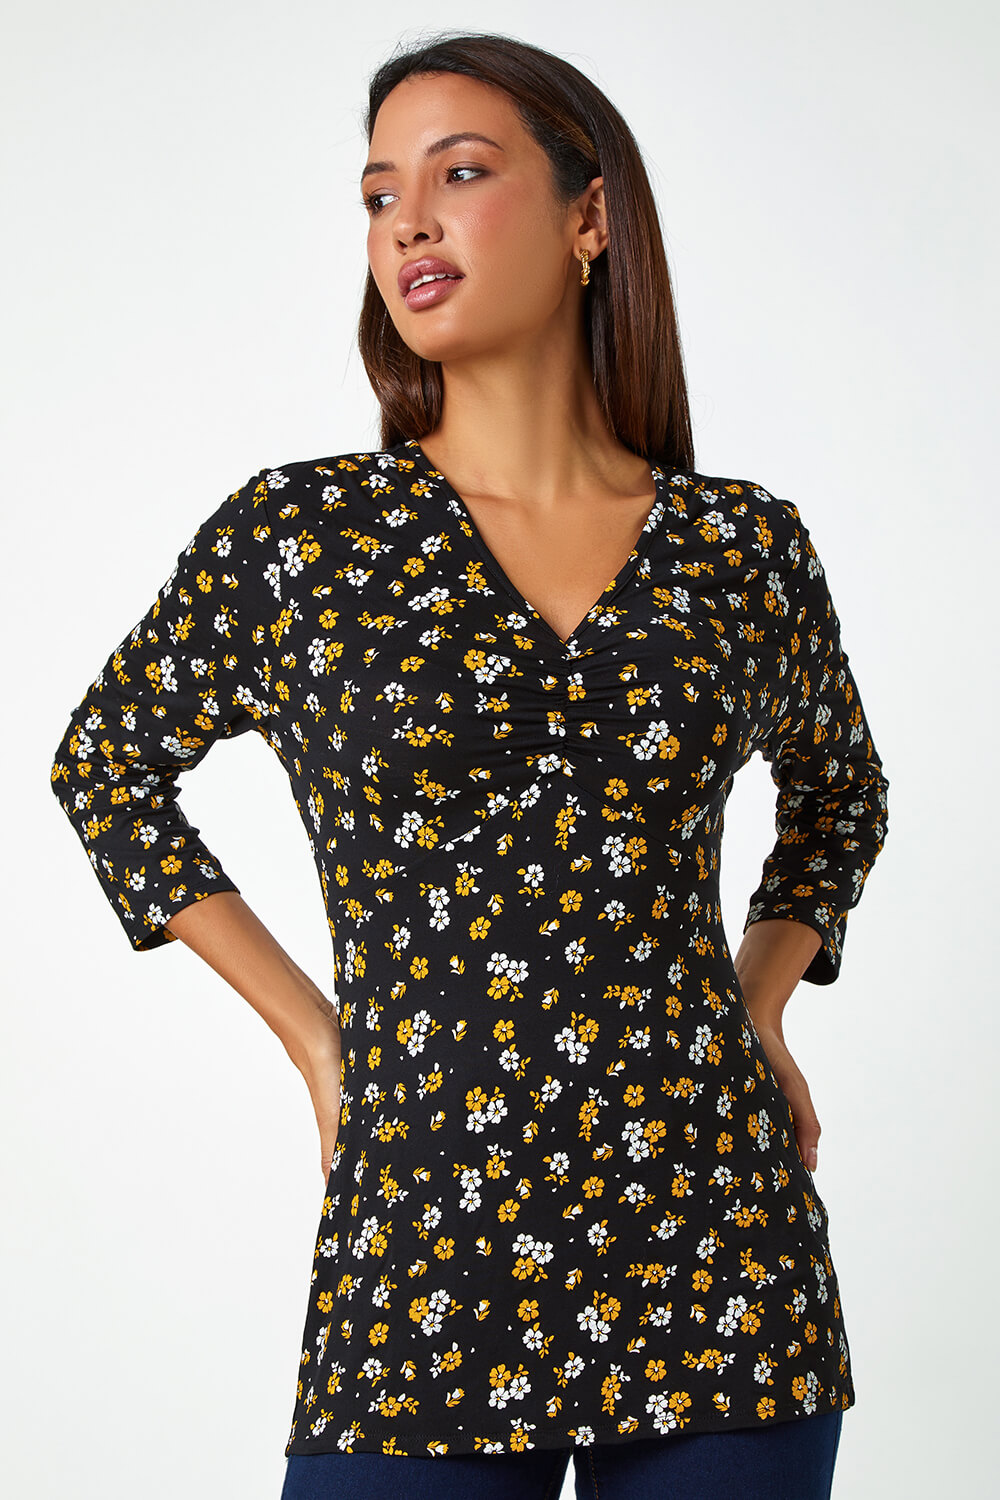 Ochre Floral Print Ruched Stretch Top , Image 4 of 5